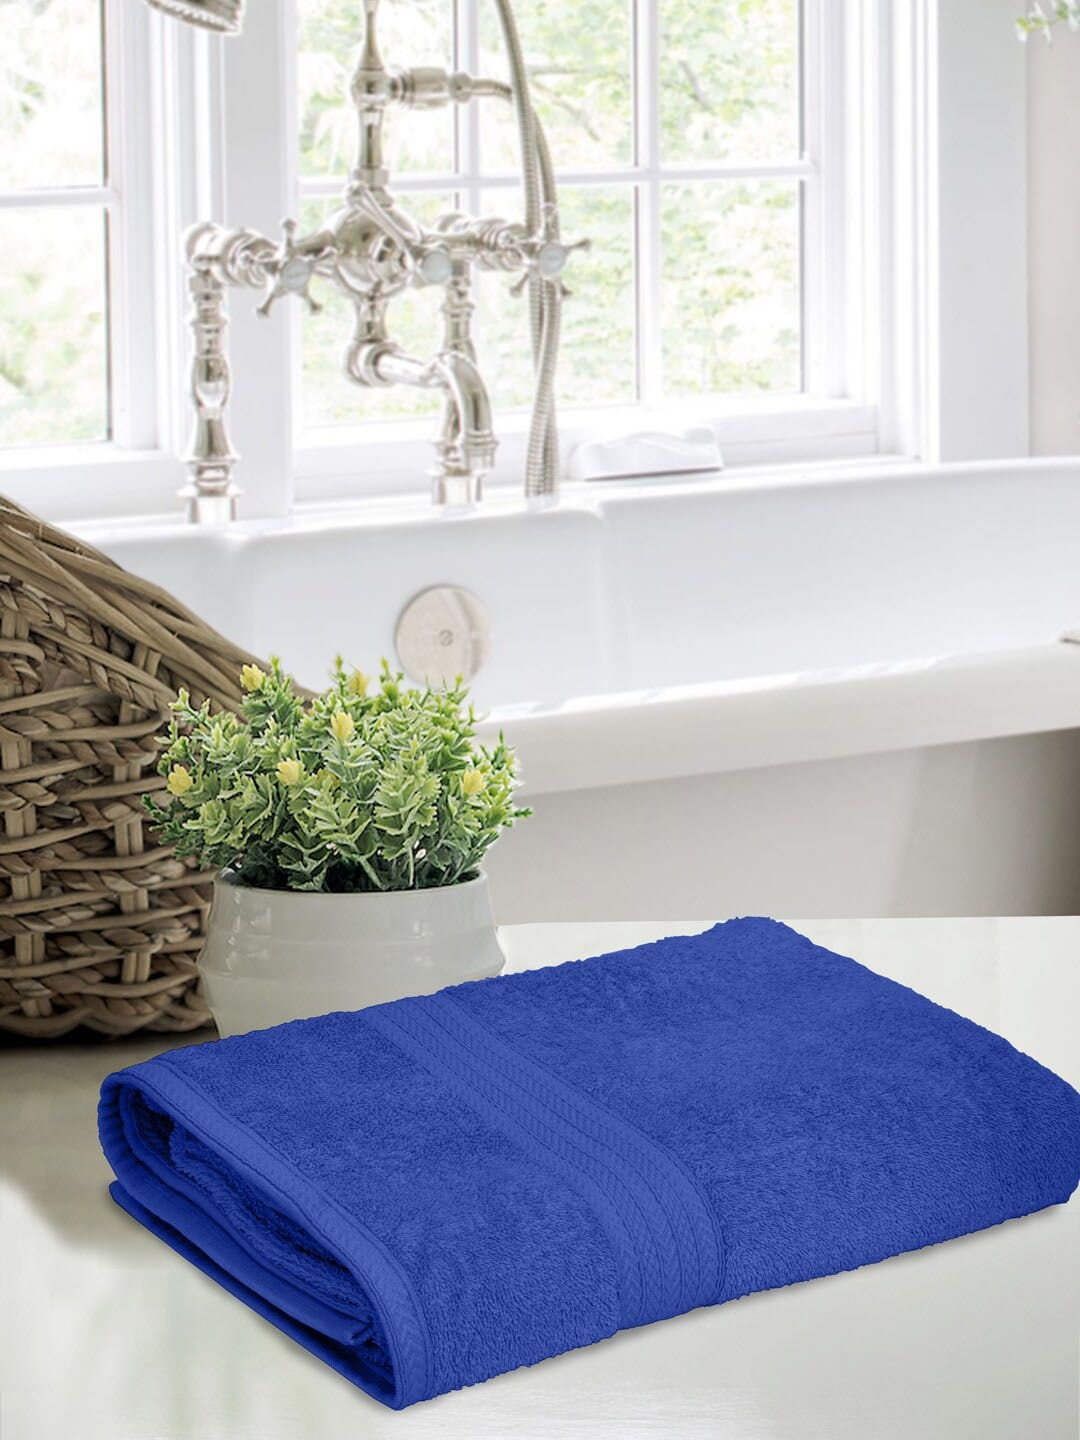 BOMBAY DYEING Blue Solid Cotton 450 GSM Bath Towel Price in India